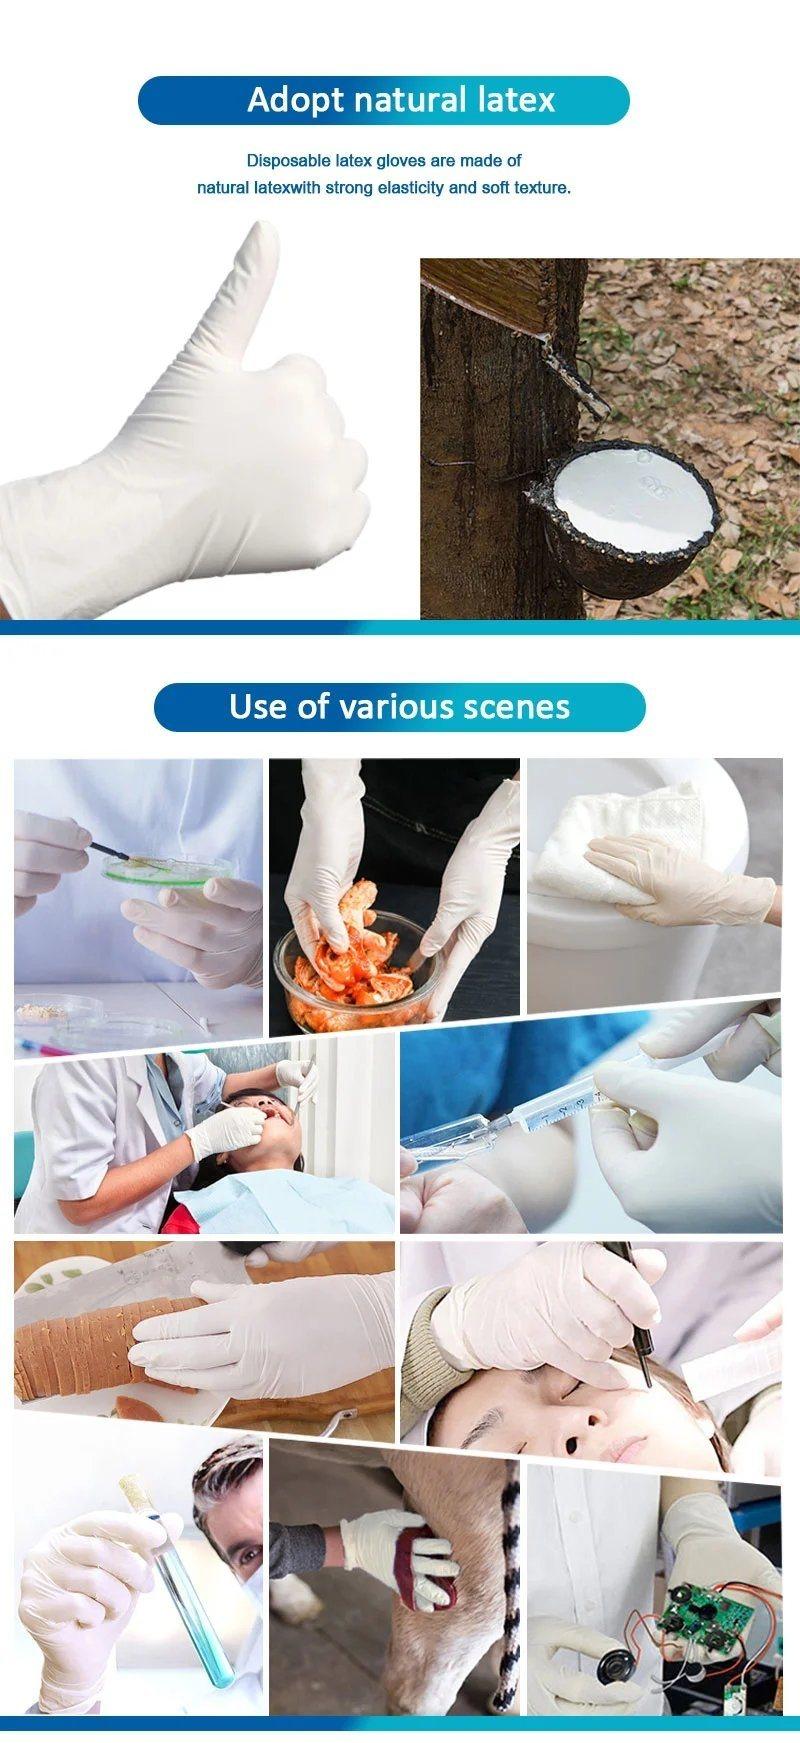 Reusable Small Surgical Gloves for Hair Removal